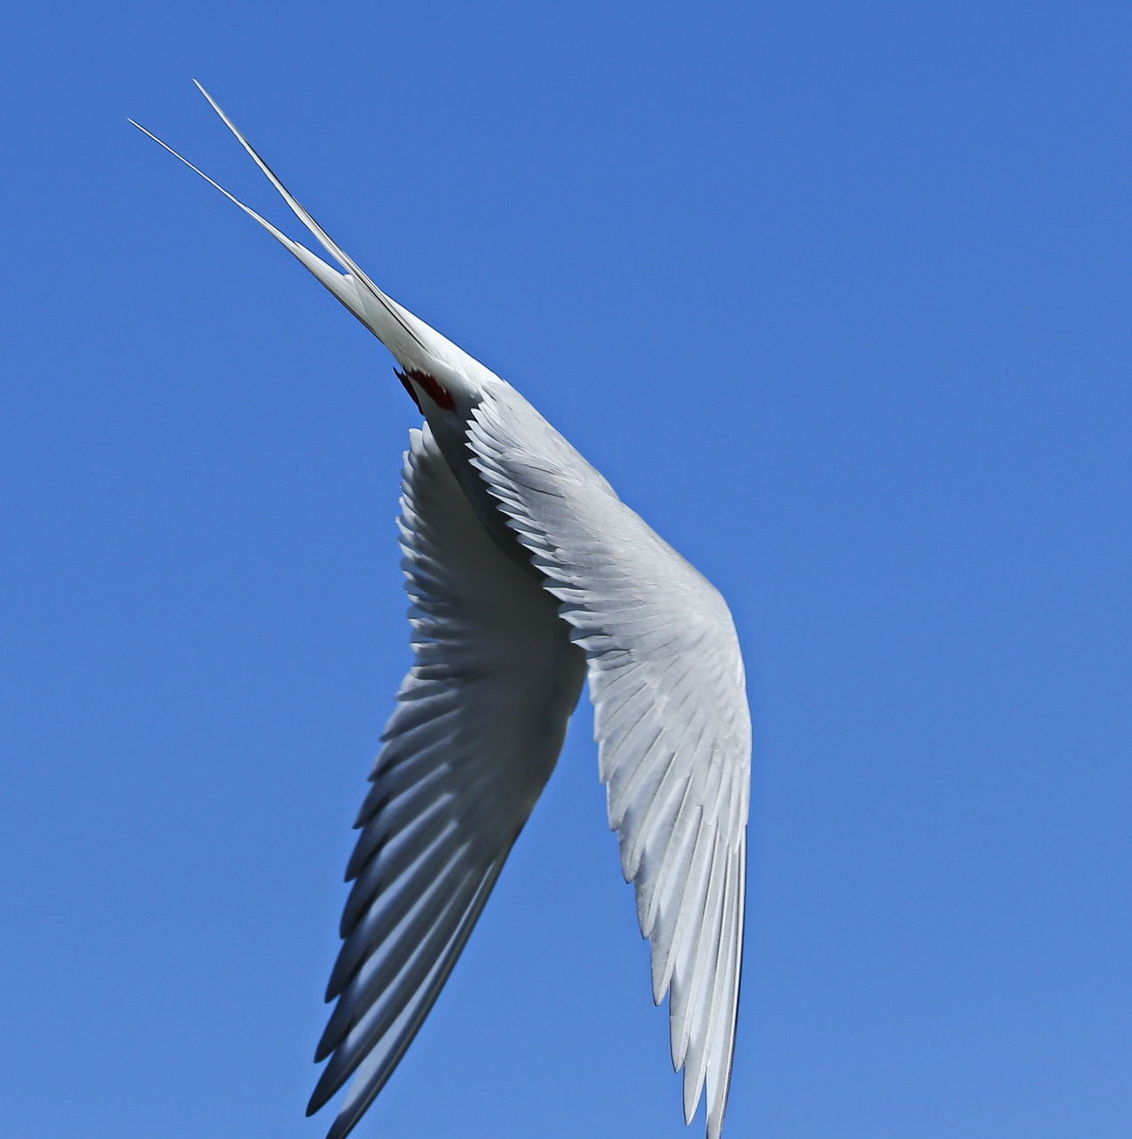 CLOSE-UP OF BIRD FLYING AGAINST CLEAR SKY